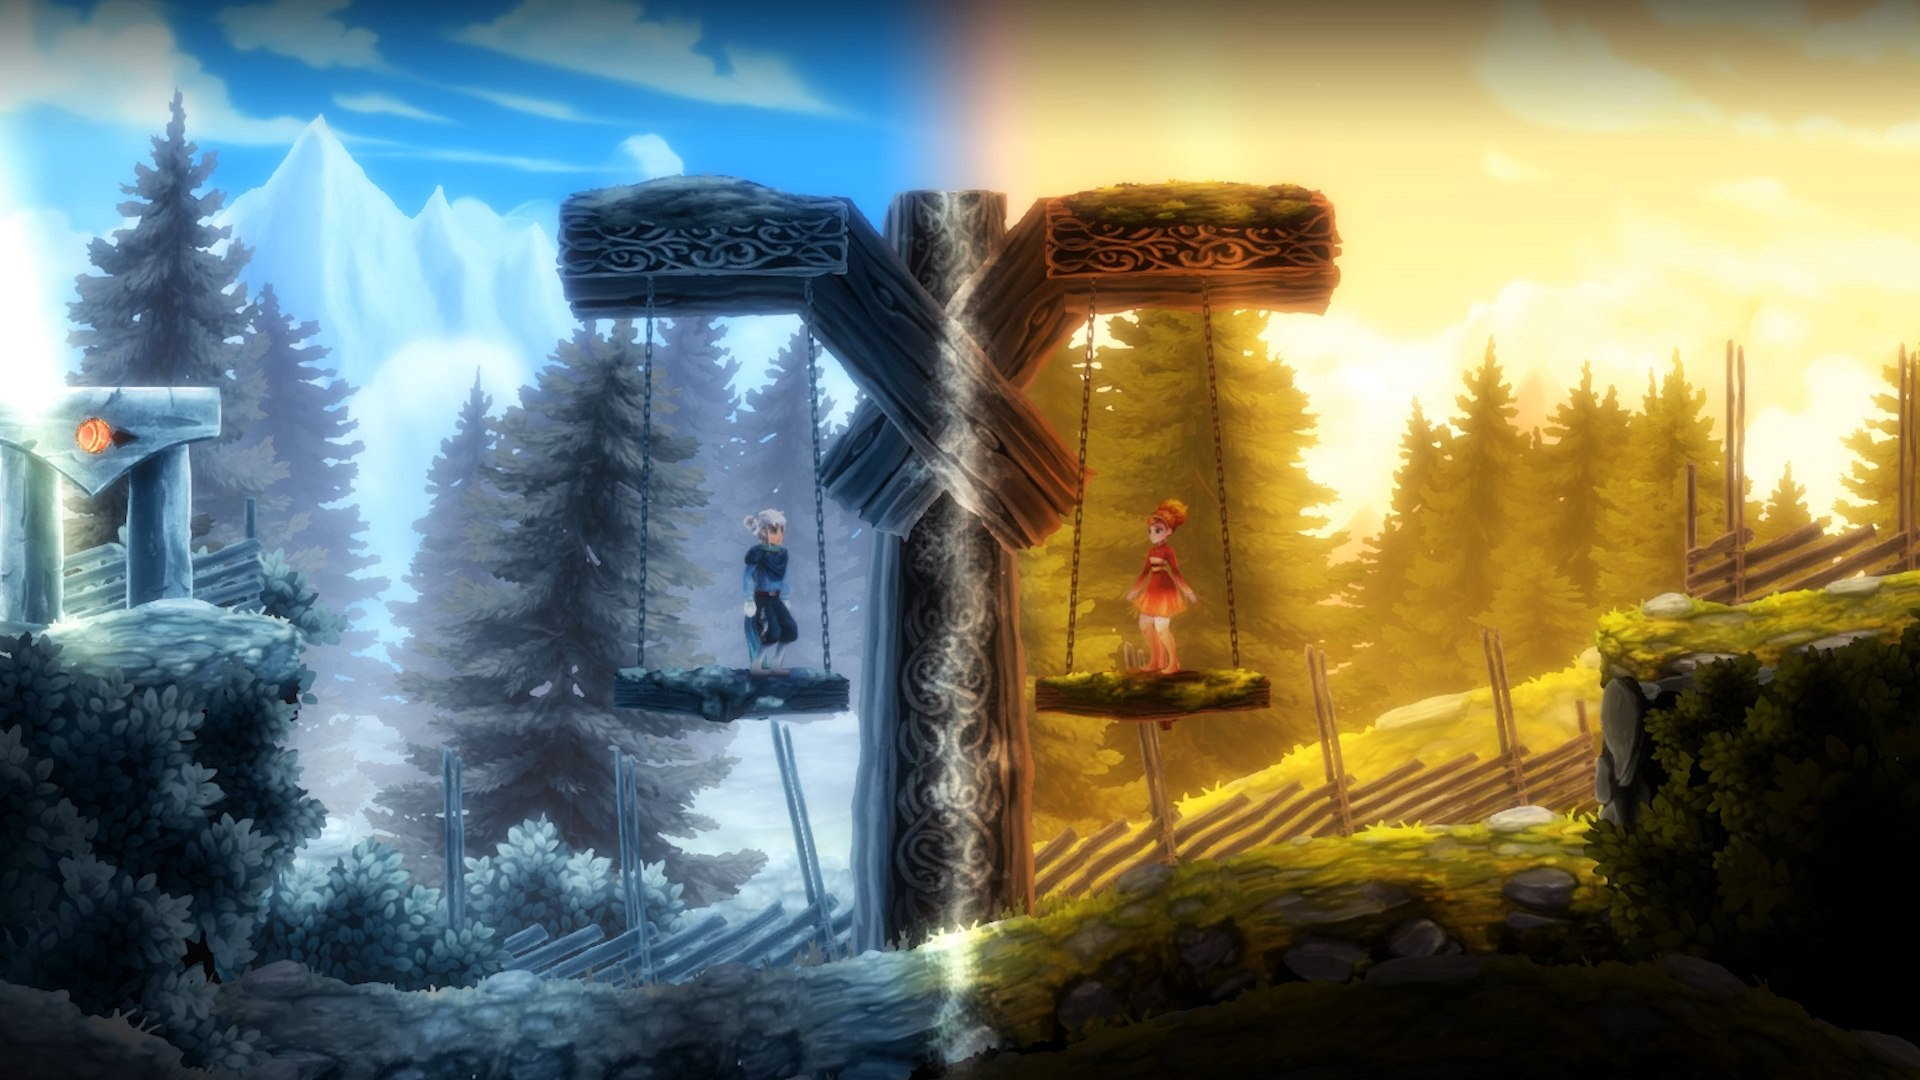 NEWS – Embrace the Powers of Heat and Cold with Co-op Platformer Degrees of Separation – trailer here